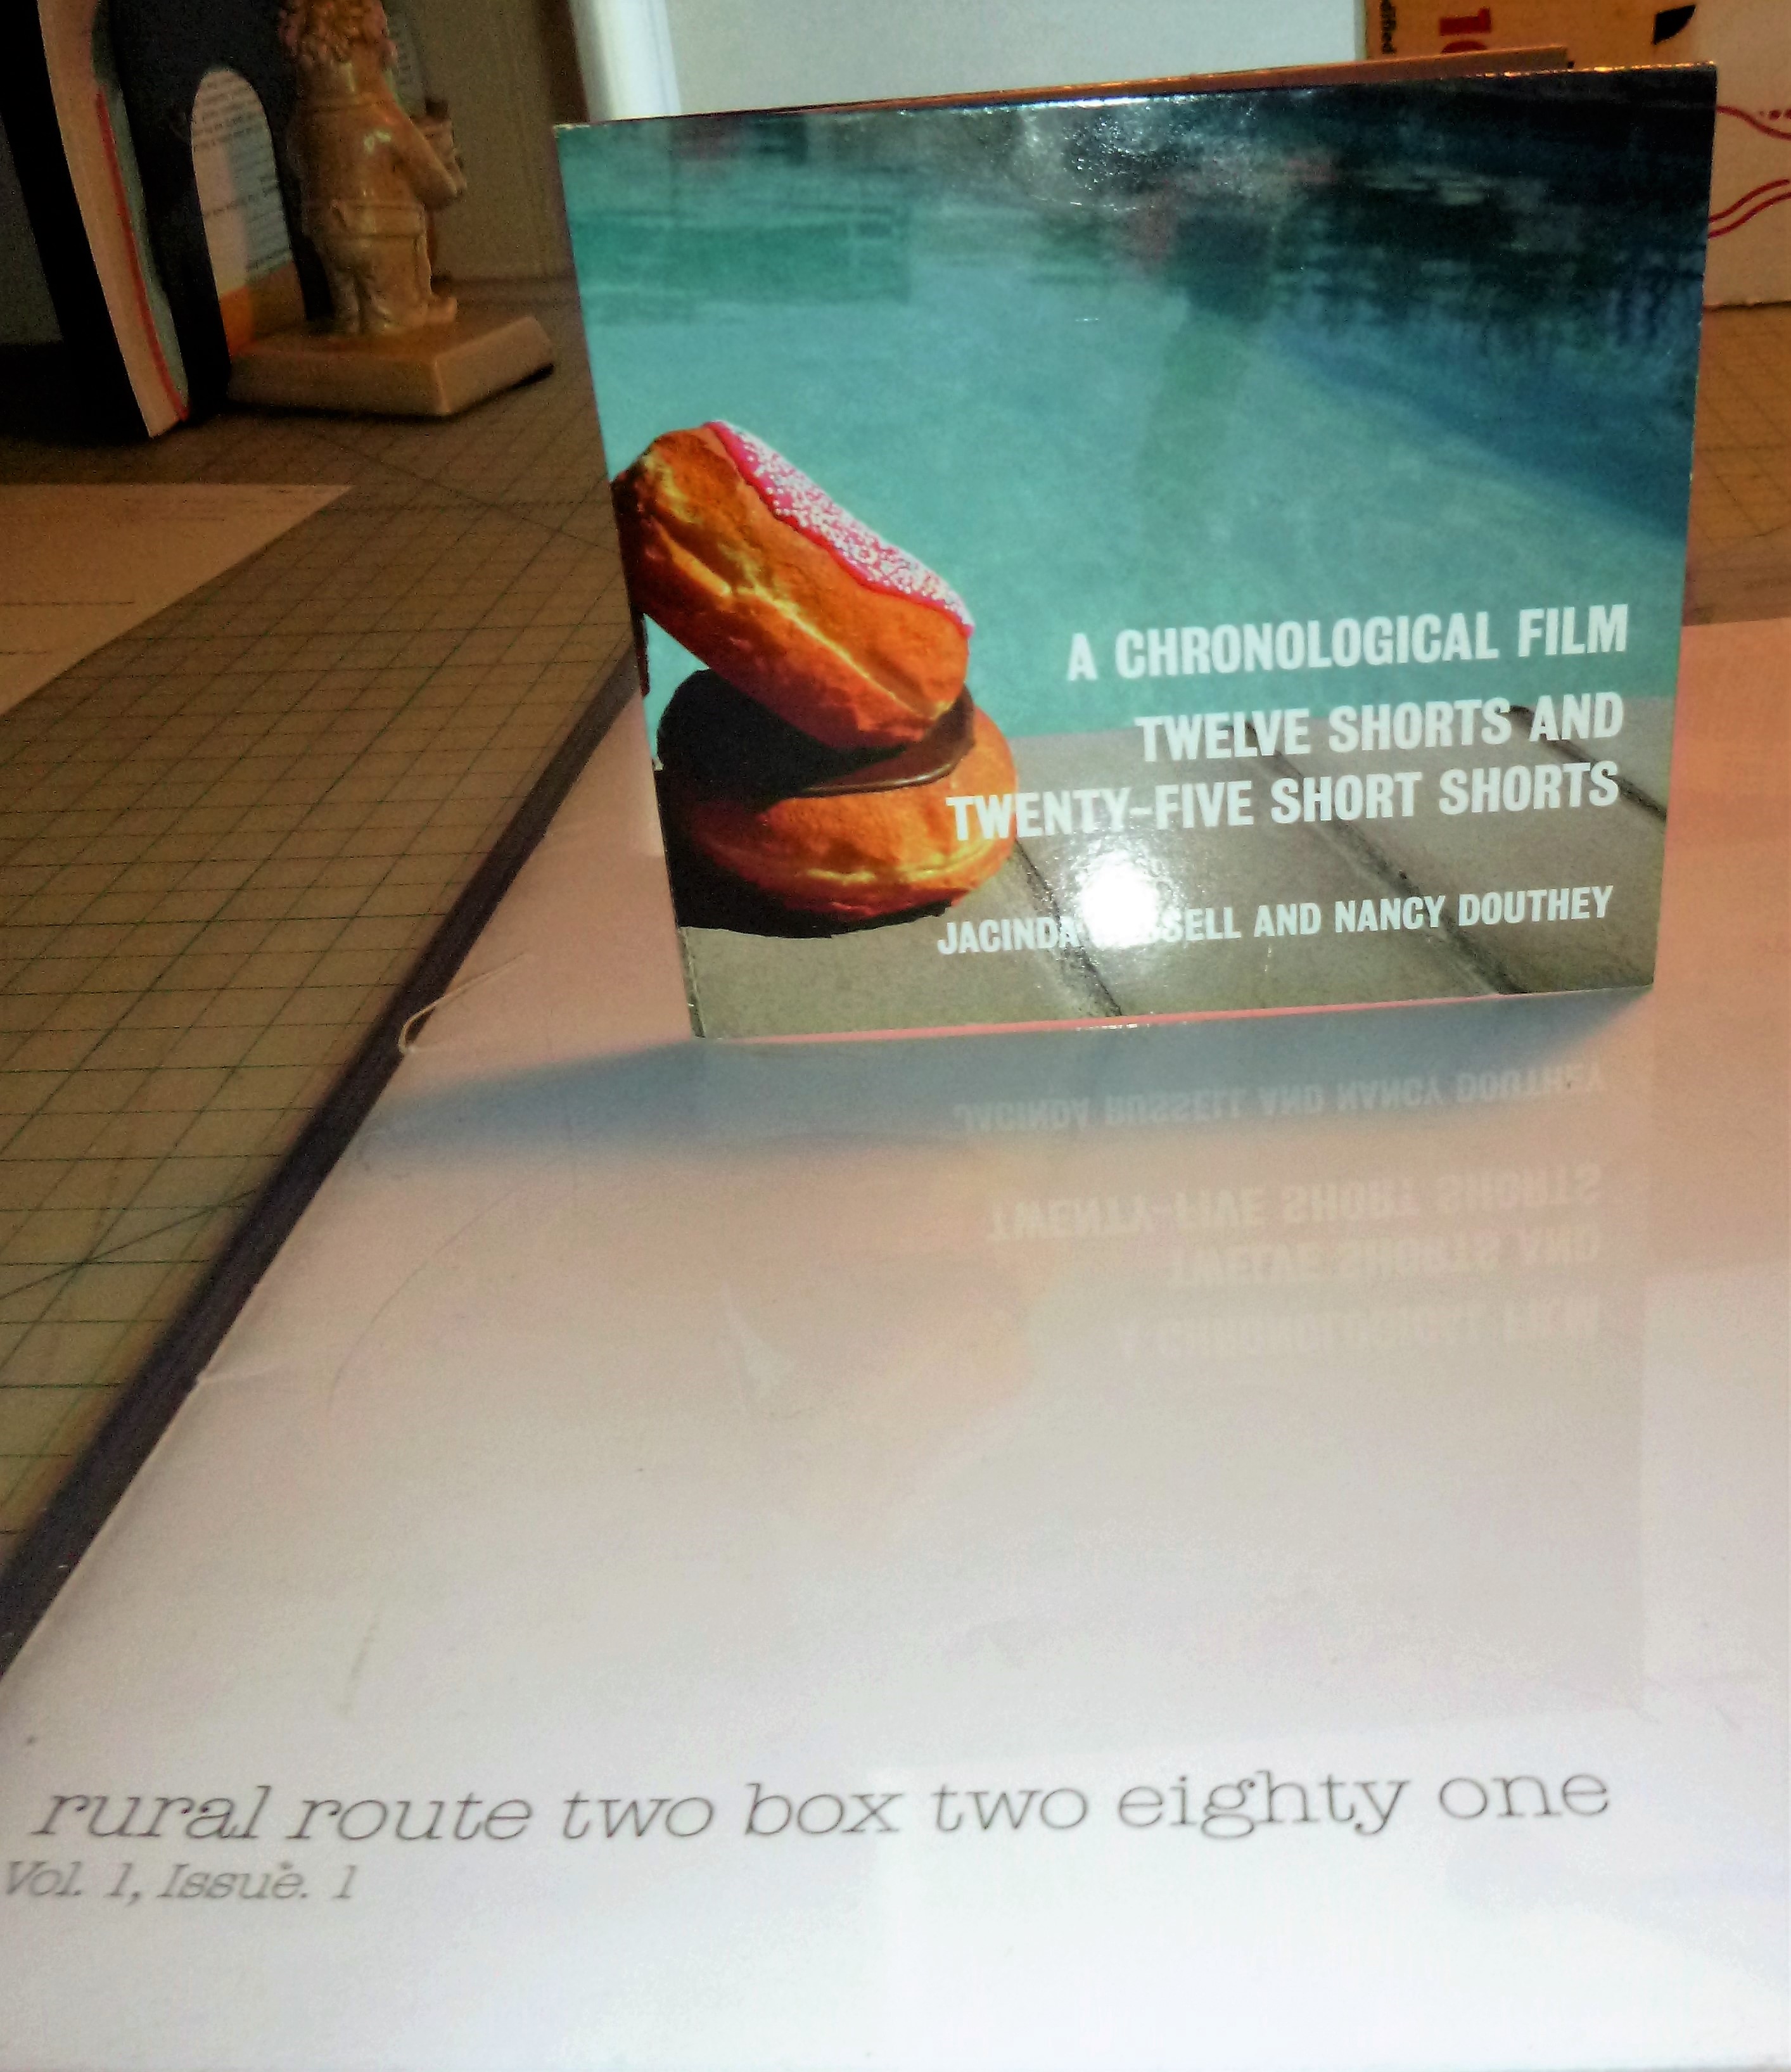 Image for rural route twobox two eighty one